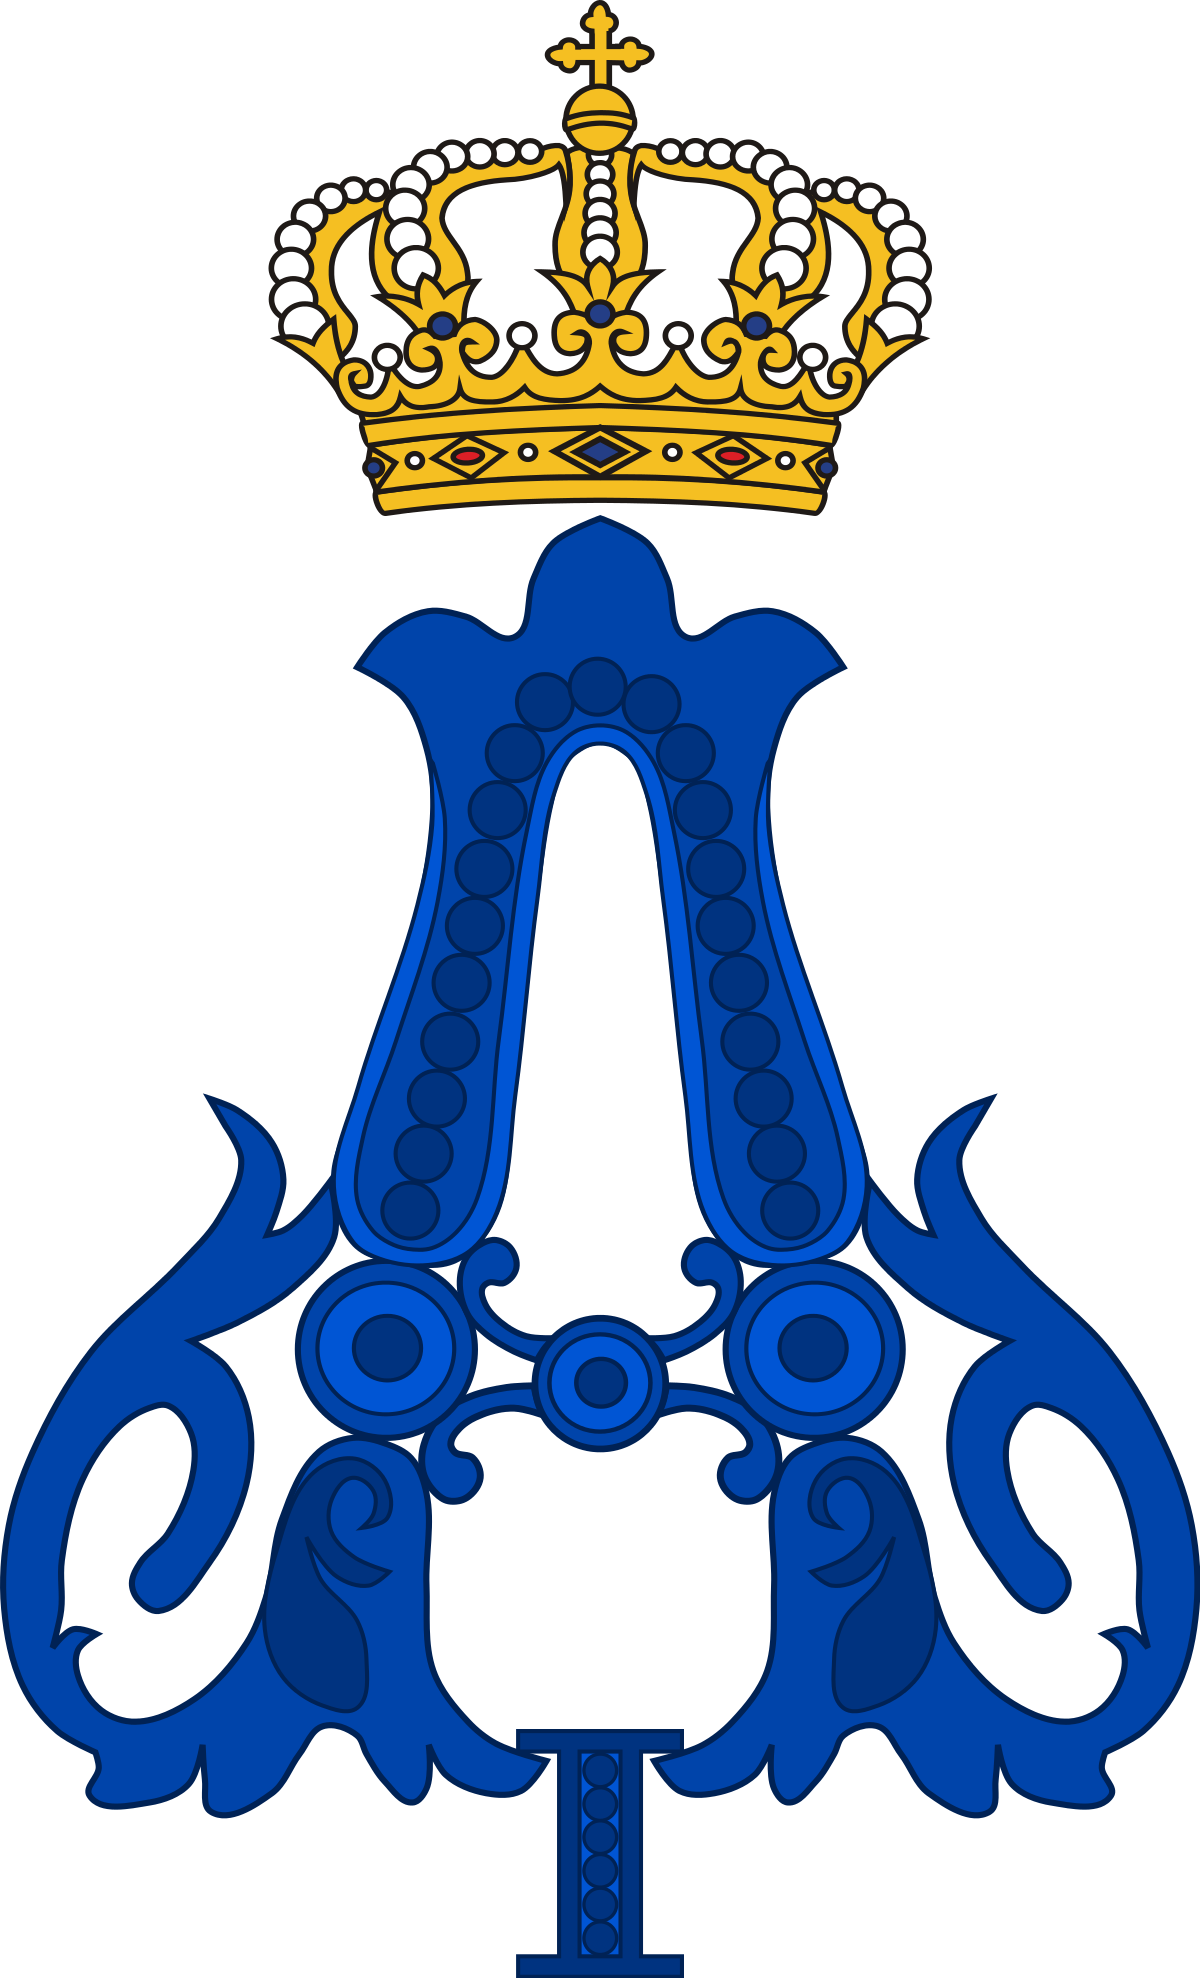 Download File Royal Monogram Of King Alexander I Of Serbia Svg Wikimedia Commons